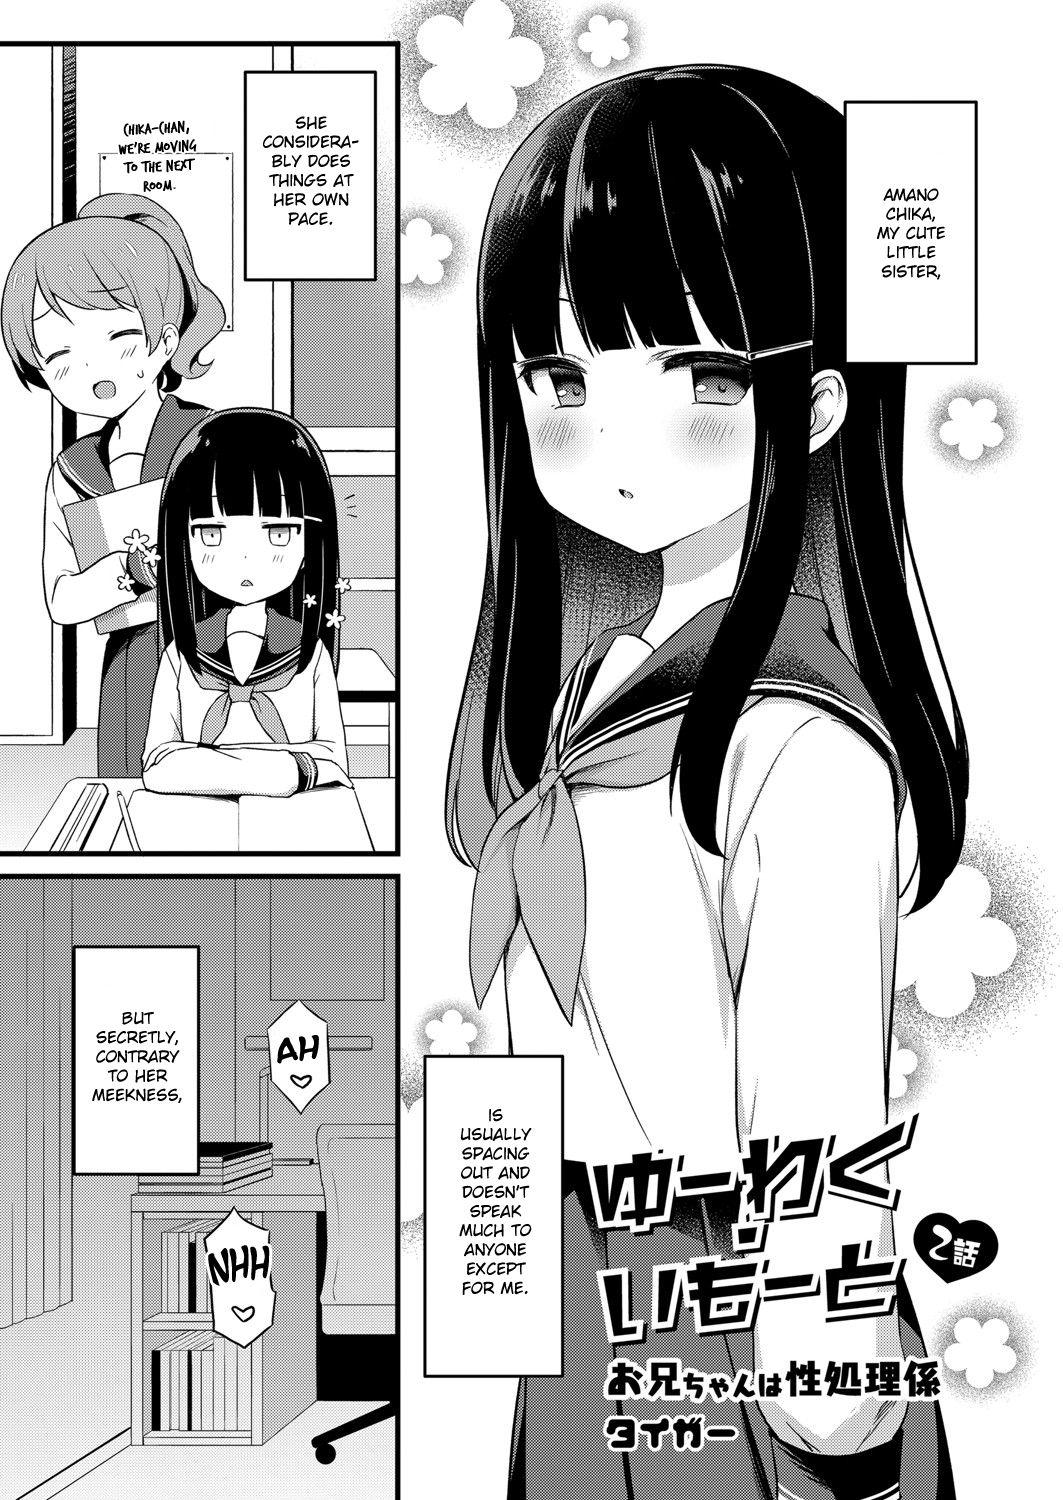 Face [Tiger] Yuuwaku・Imouto #2 Onii-chan wa seishori gakari | Little Sister Temptation #2 Onii-chan is in Charge of My Libido Management (COMIC Reboot Vol. 07) [English] [Digital] Cream Pie - Picture 1